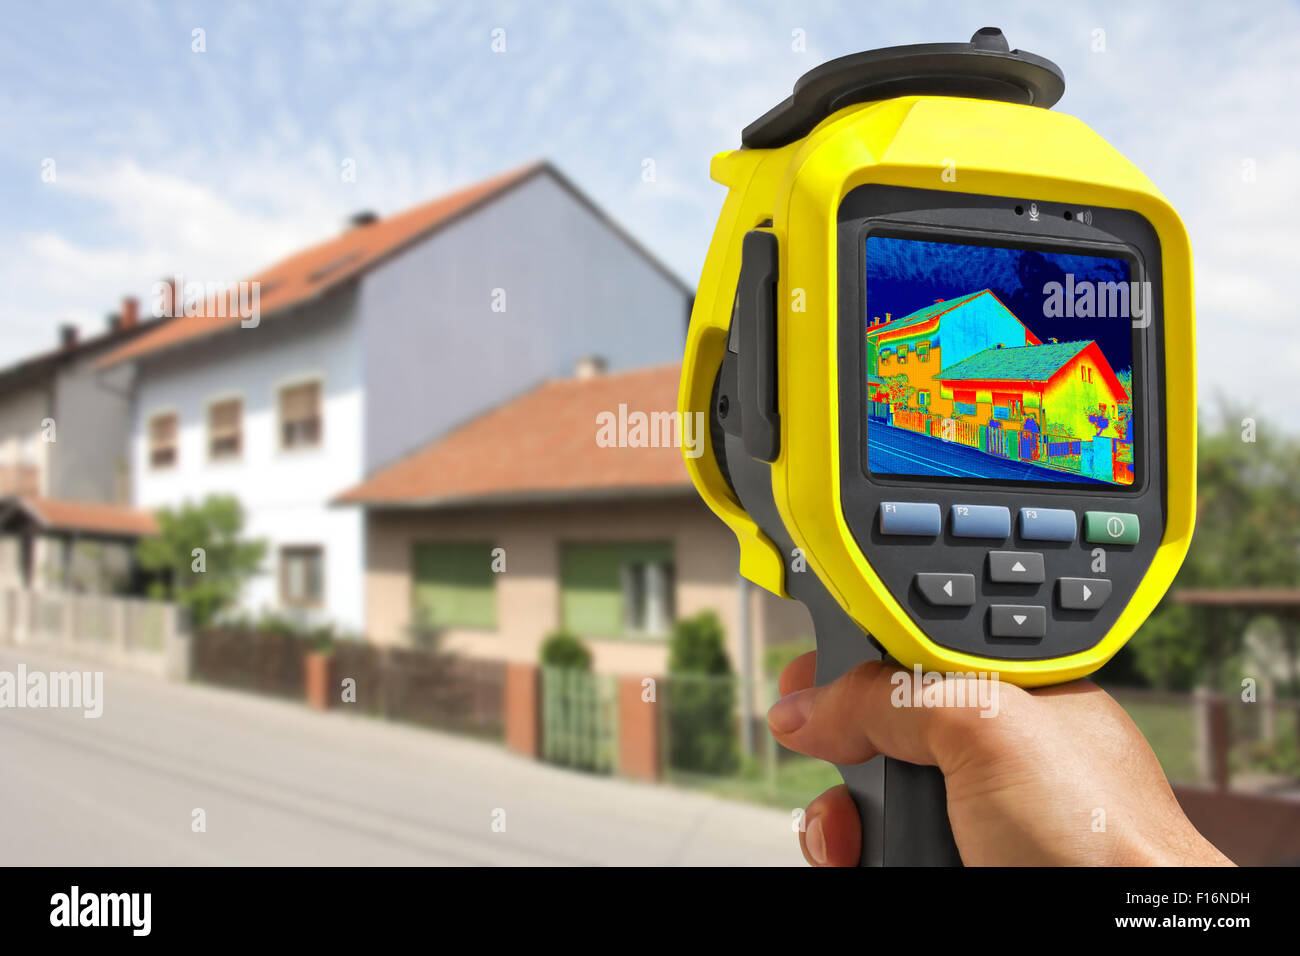 Recording Heat Loss at the House With Infrared Thermal Camera Stock Photo